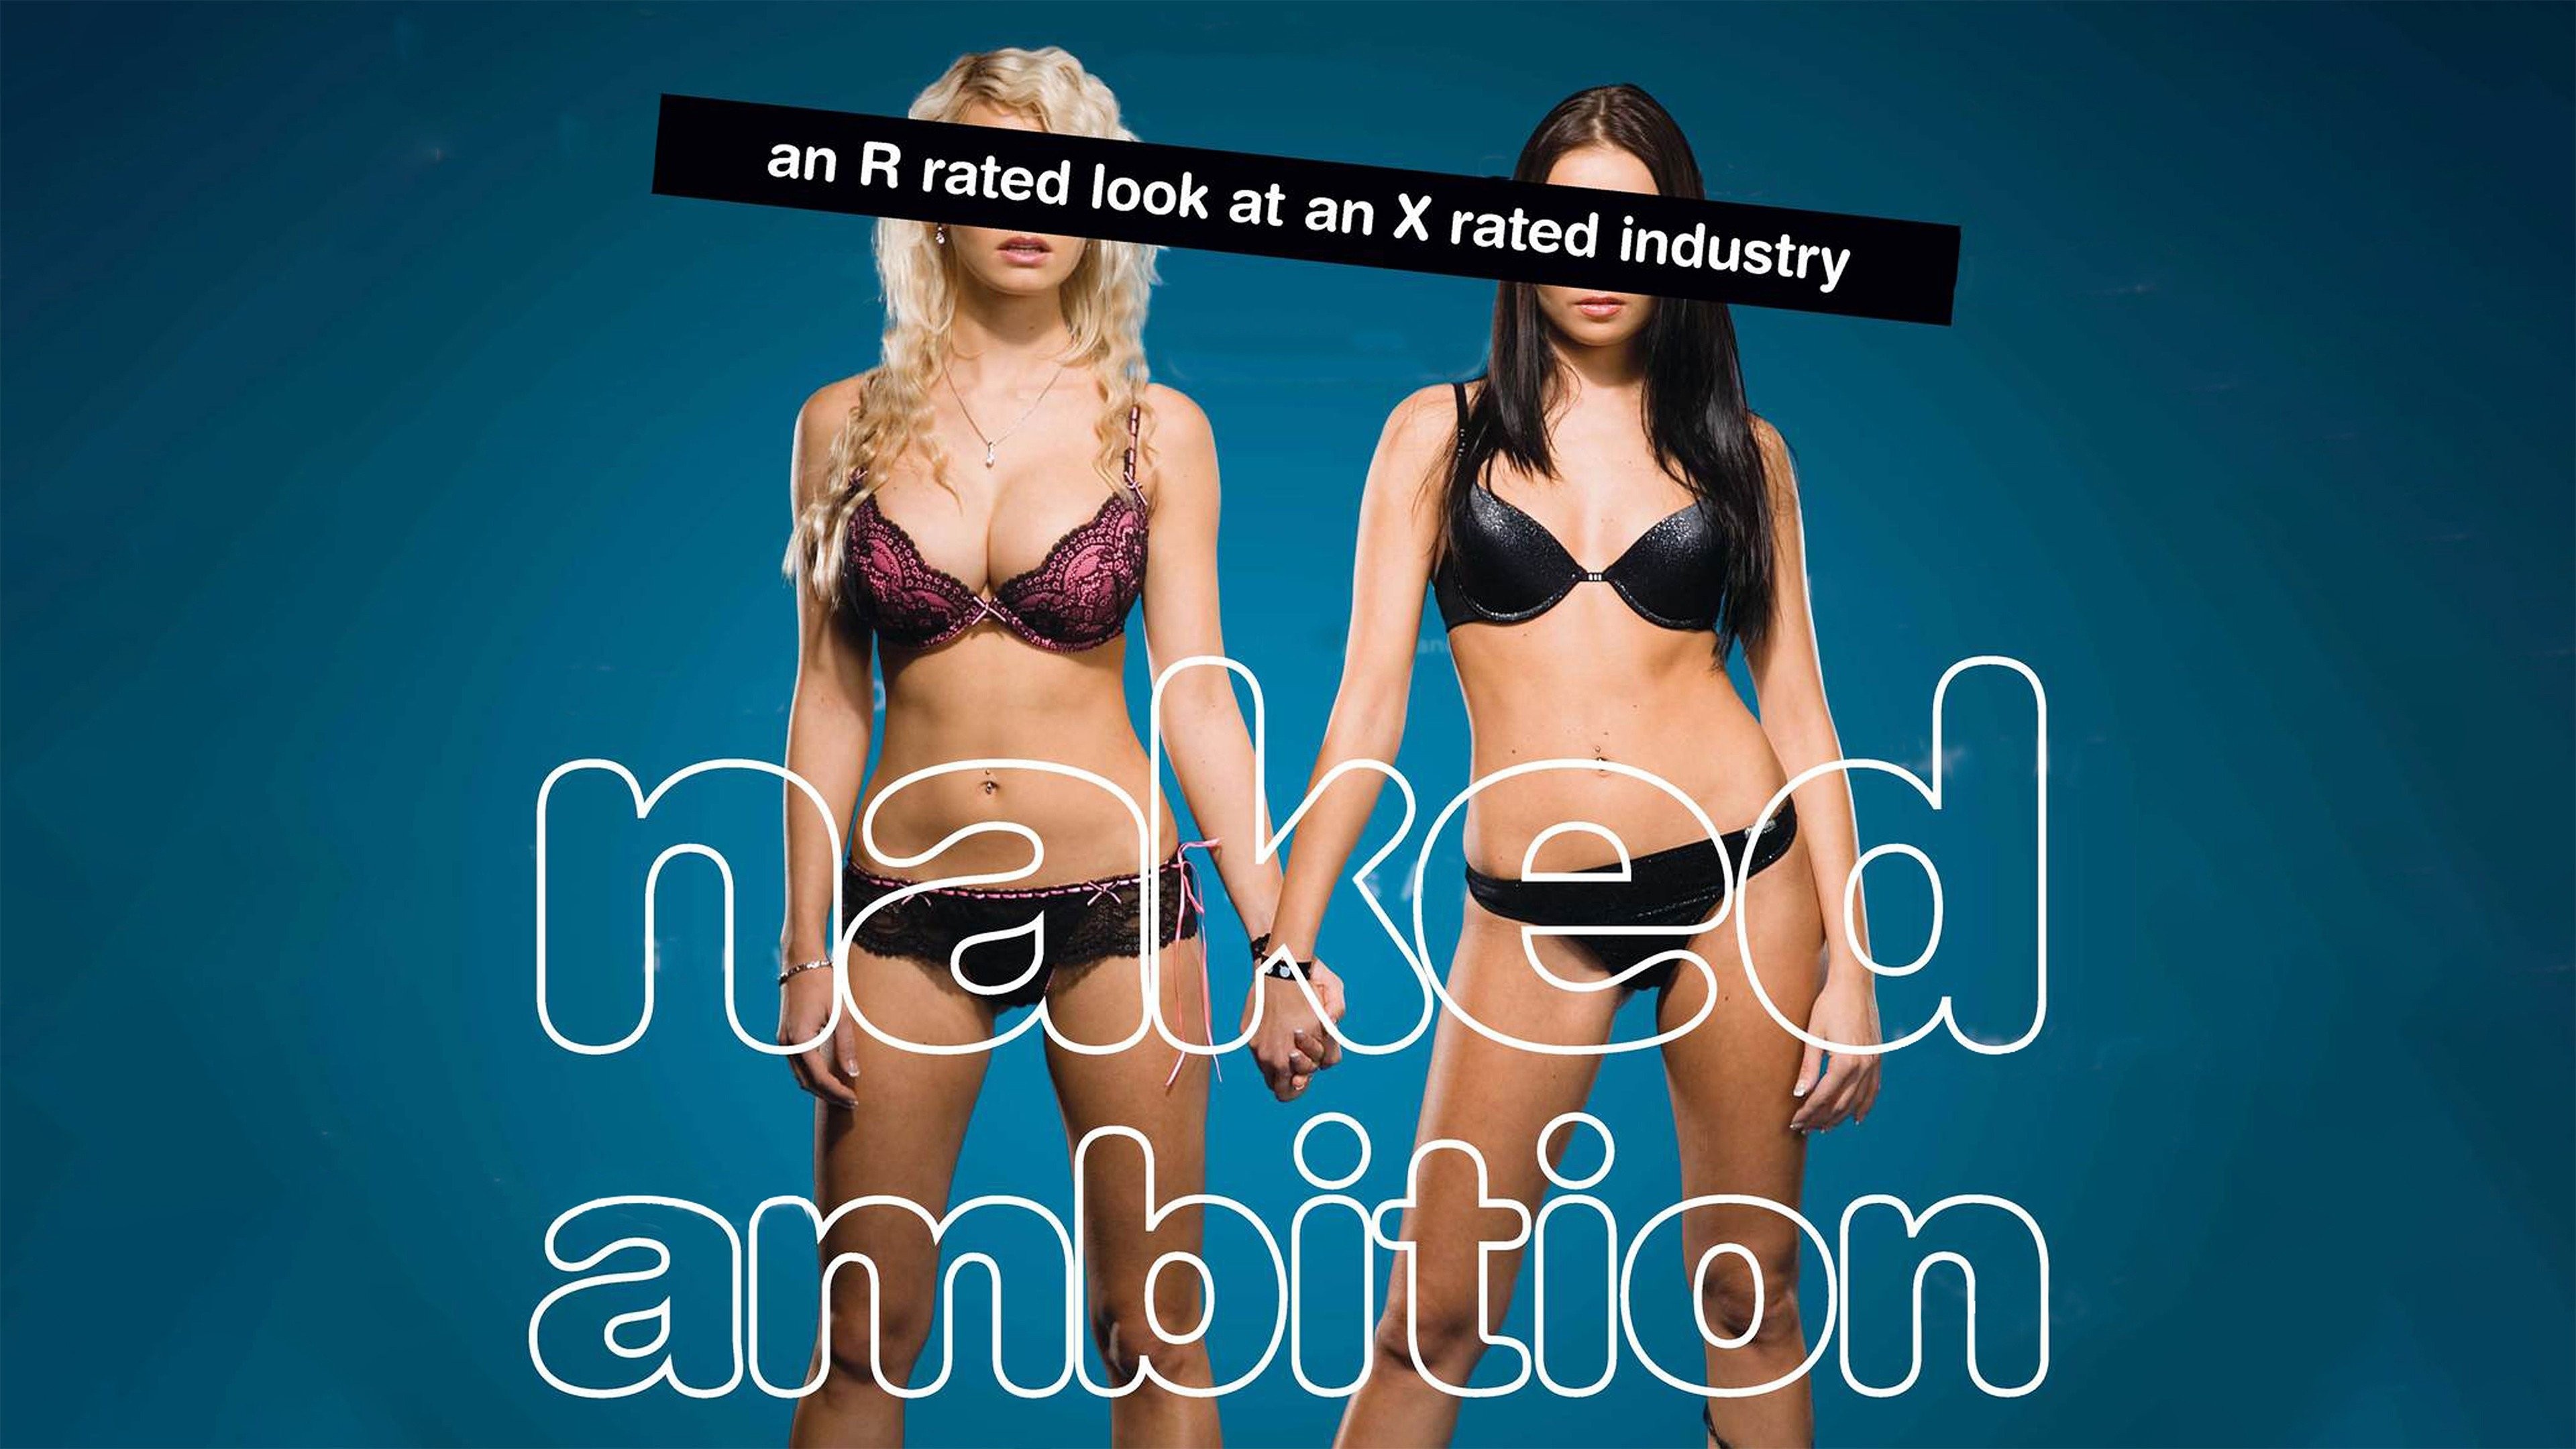 Buy Naked Ambition: An R Rated Look at an X Rated Industry